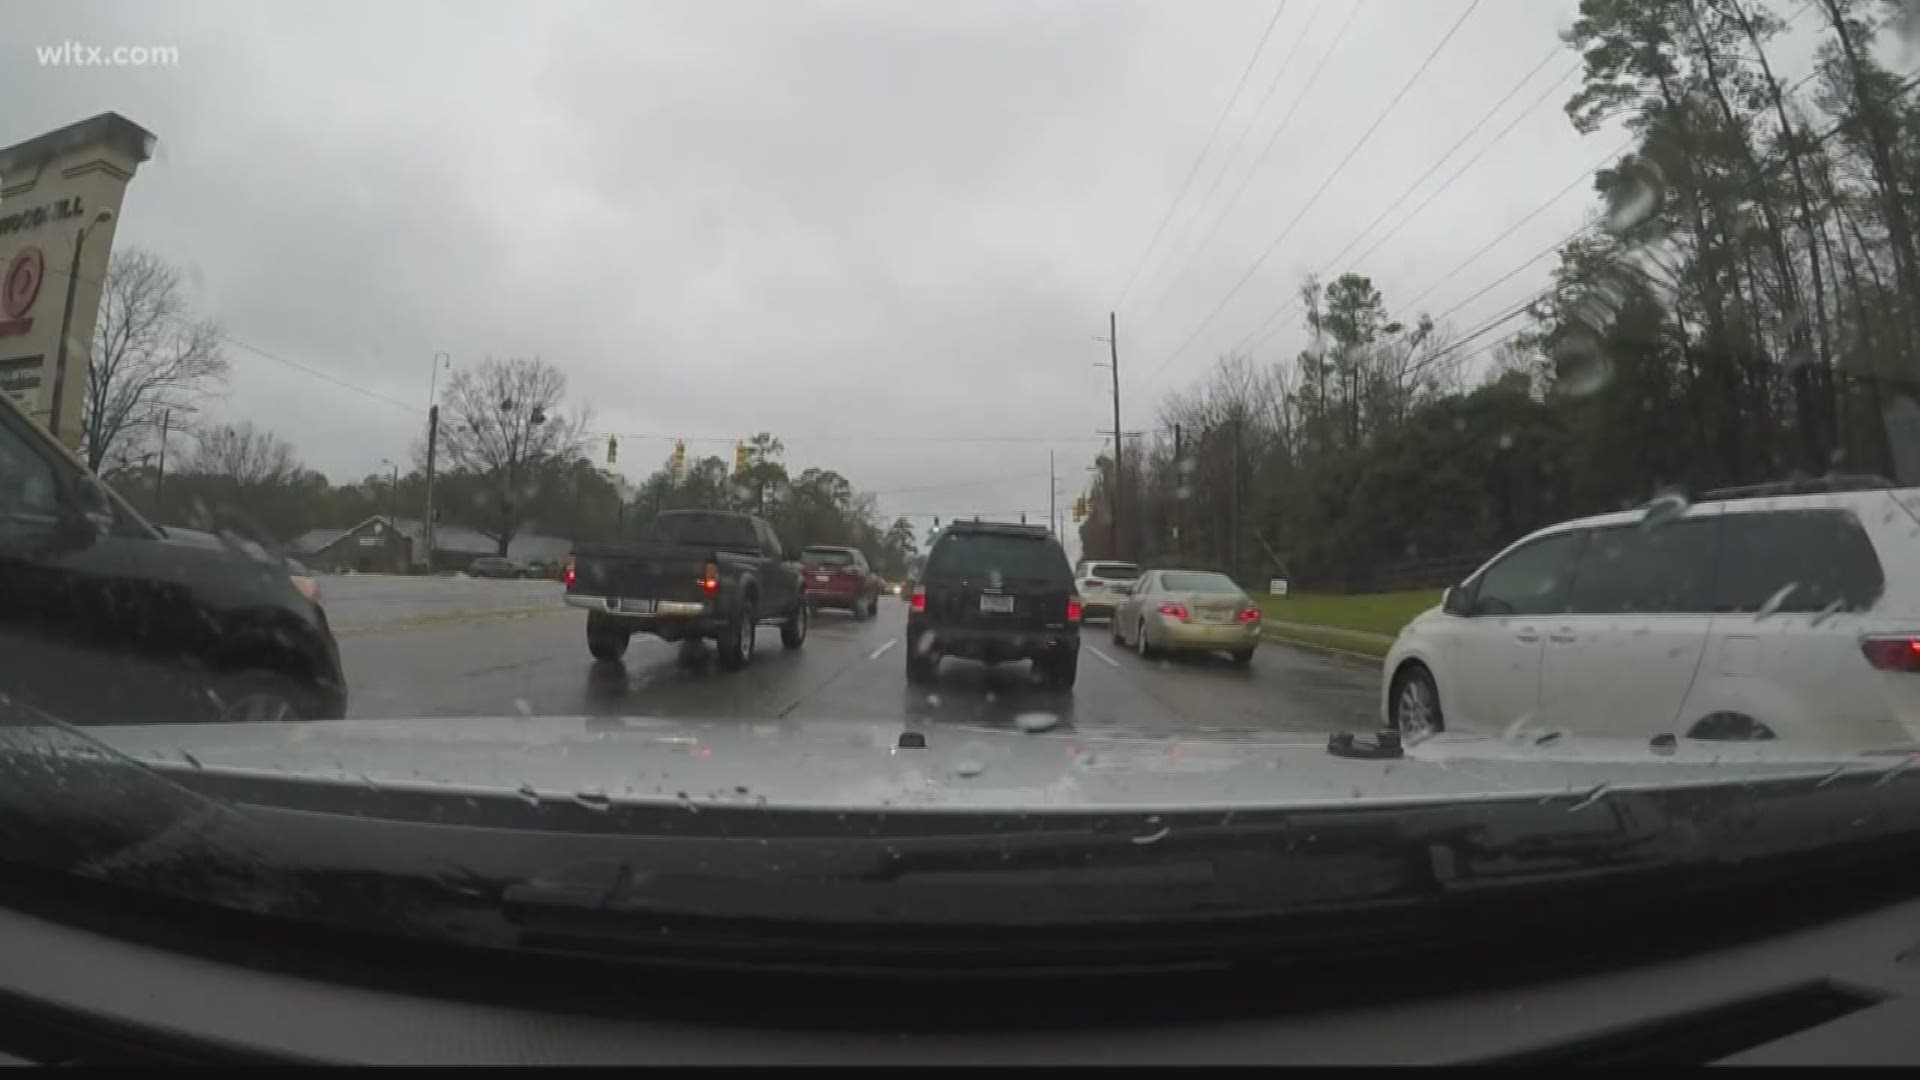 Holiday traffic is a common issue this time of year, but one of the worst places to get caught in it is Harbison Blvd.